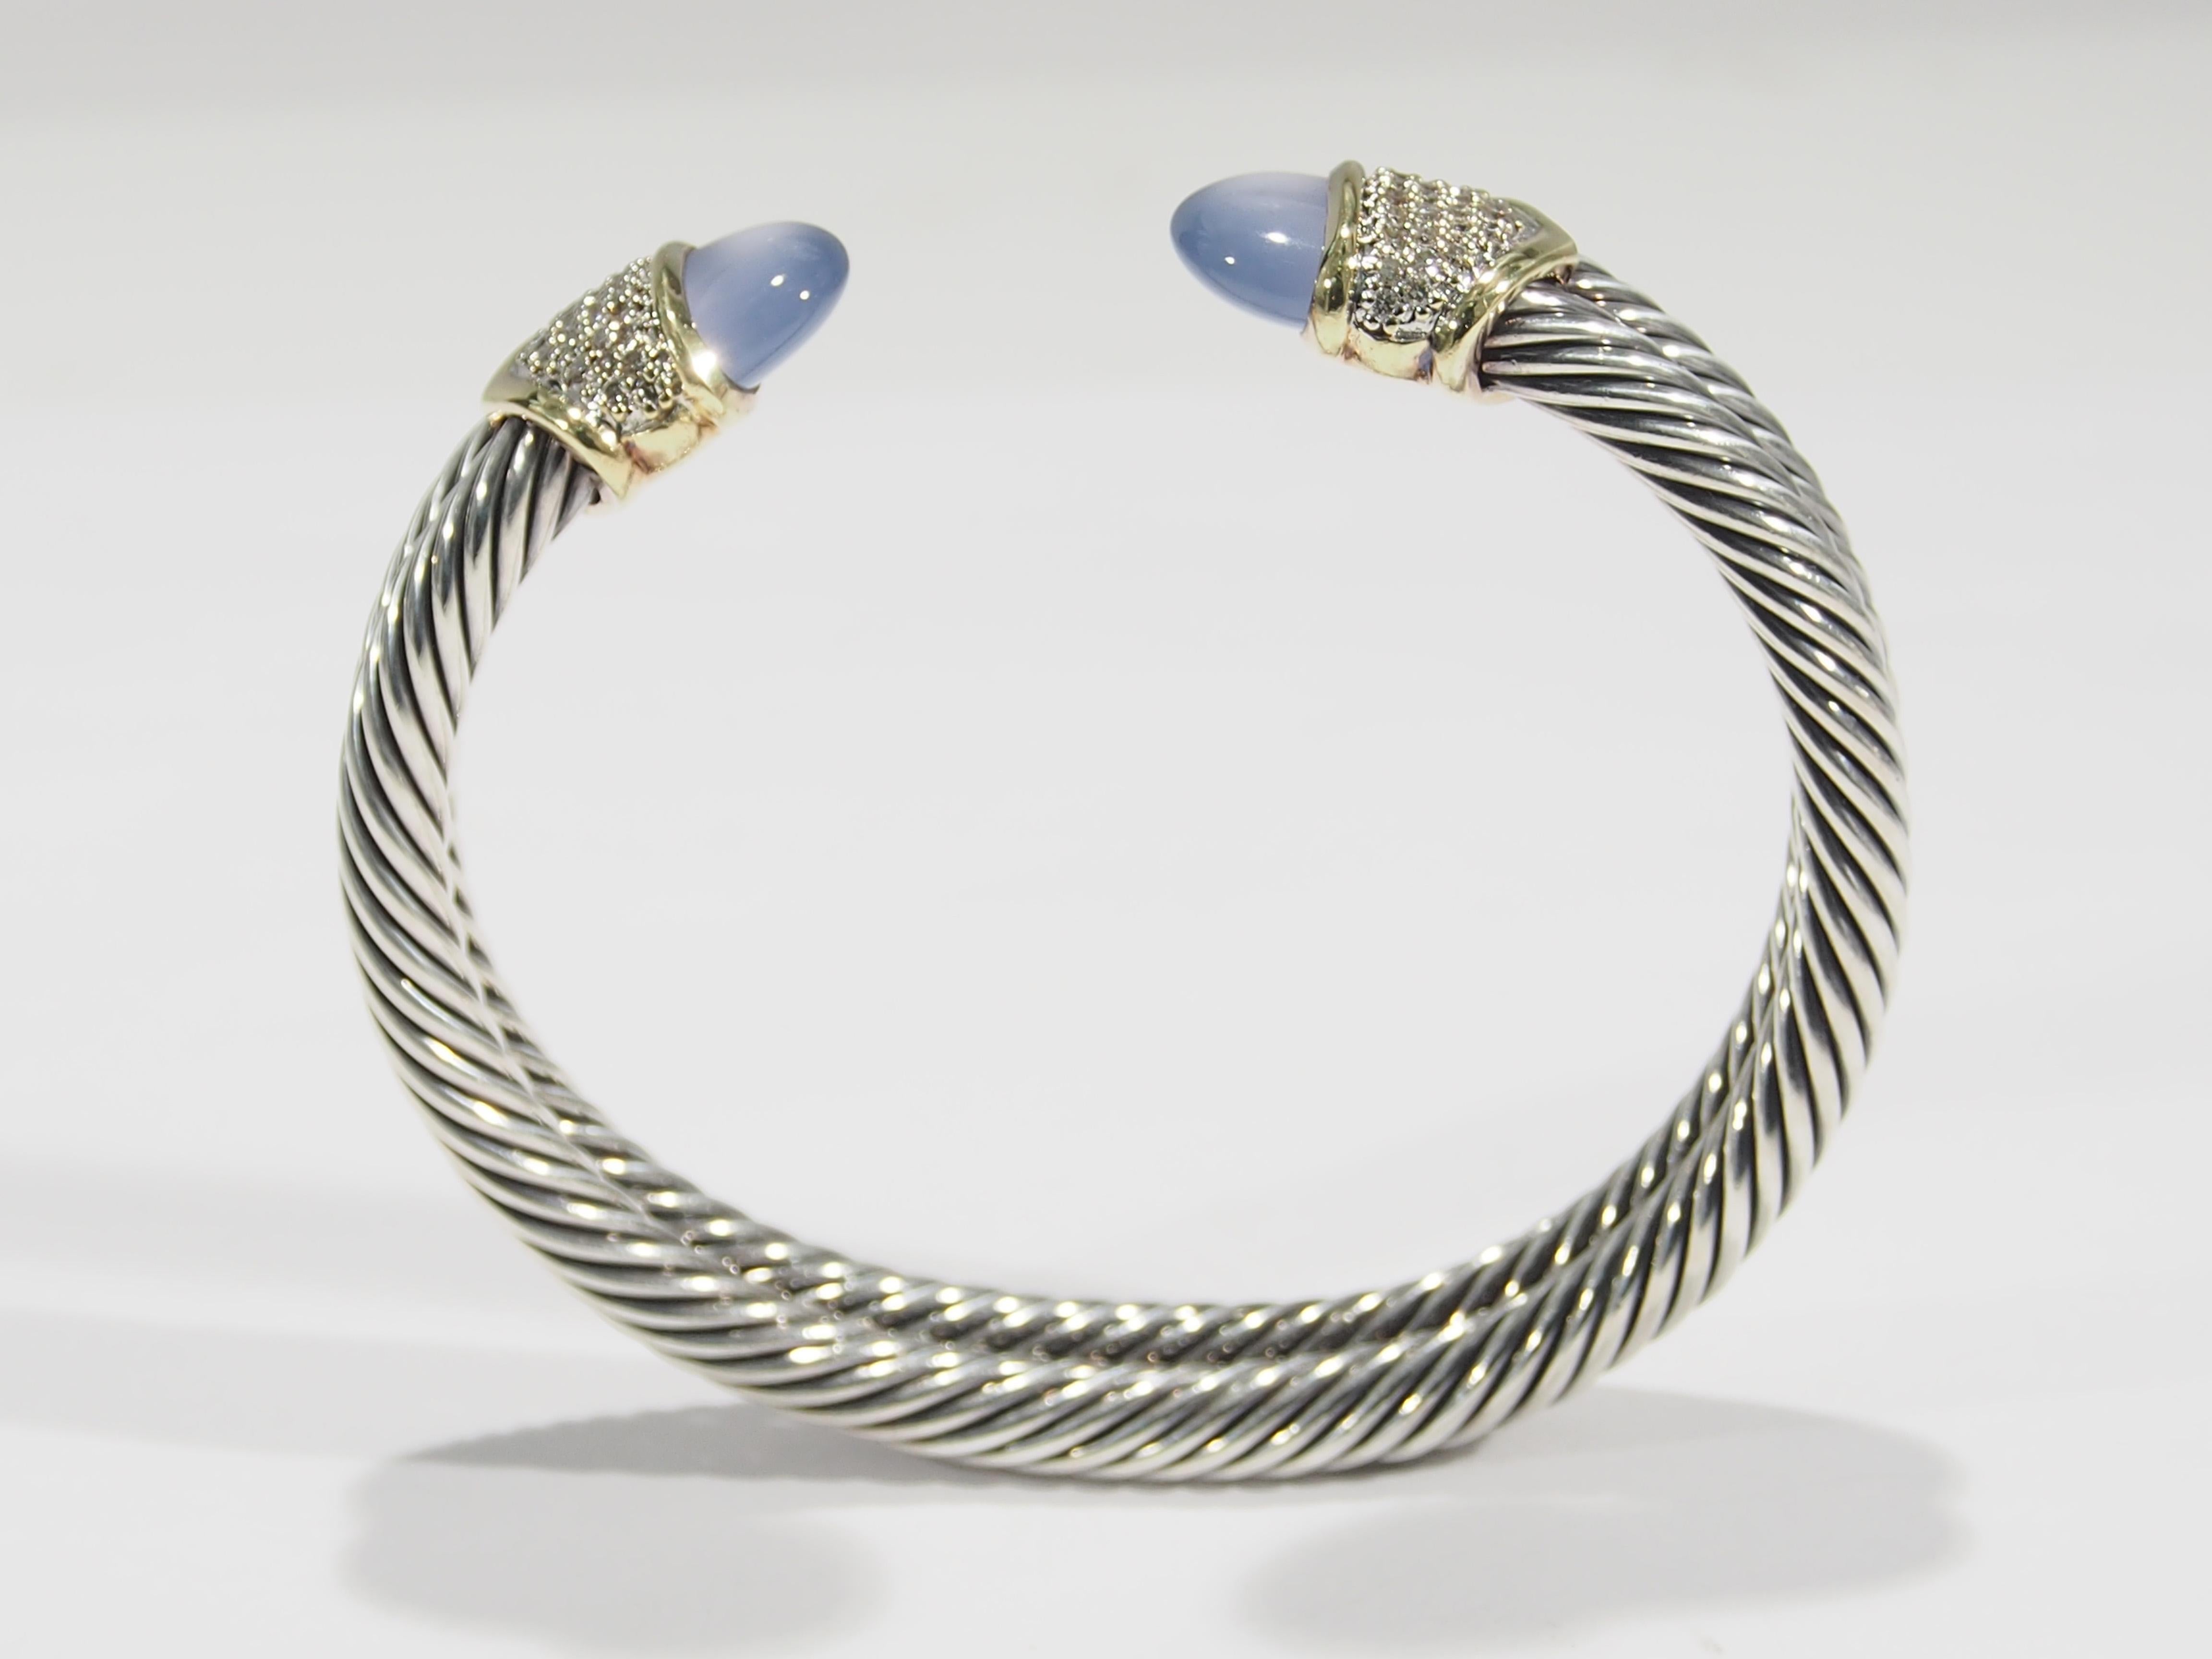 A David Yurman Sterling Silver and 18k Yellow Gold Diamond Blue Chalcedony Double Cuff. This stunning Cuff bracelet is crafted of sterling silver cable style hoops accented by symmetrical blue Chalcedony stones set in gold collars studded with Pave